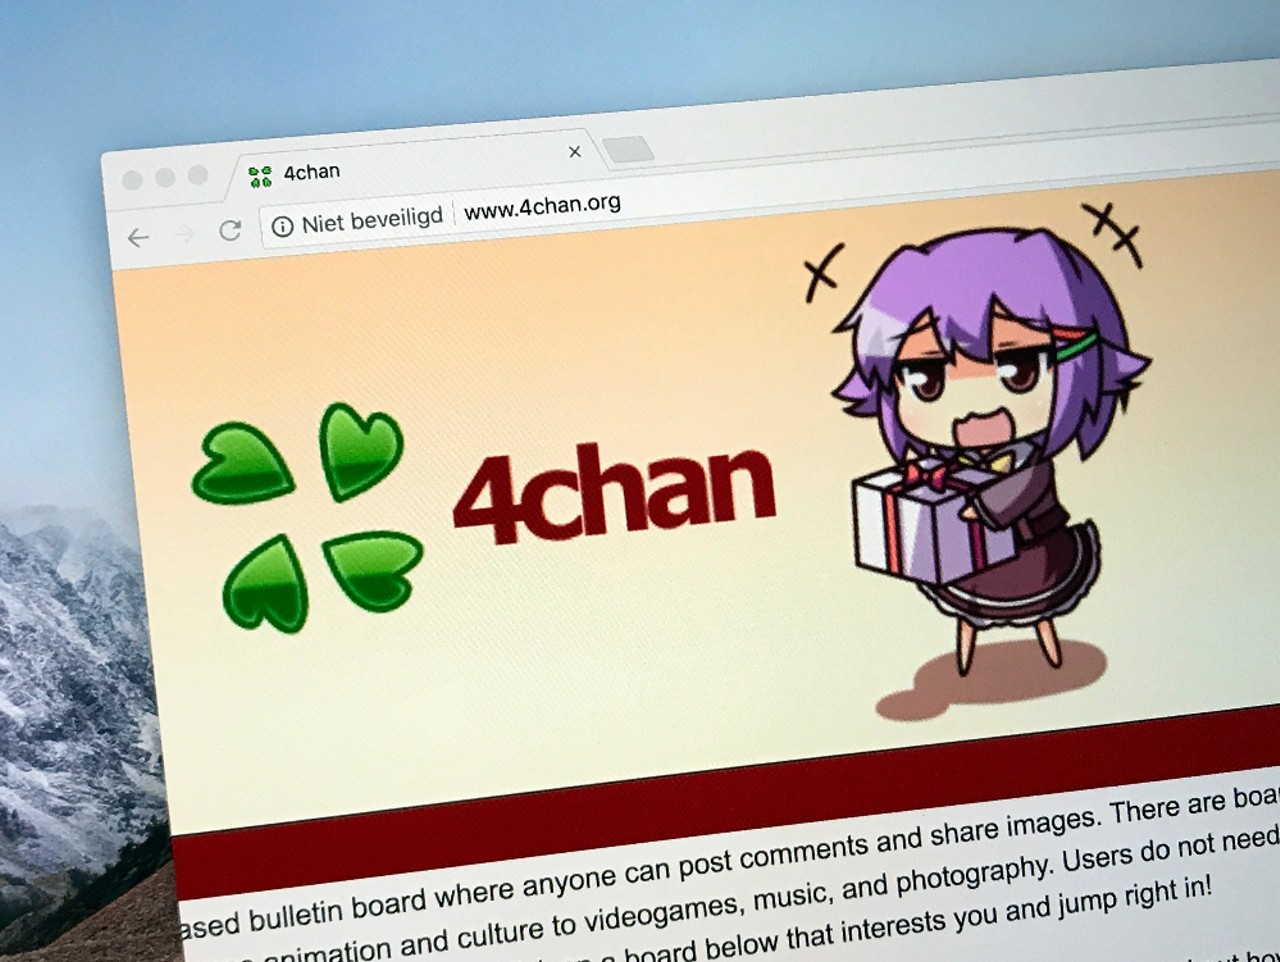 4chan
The lawless outpost that begat some of the internet's most vile movements was founded in 2003.
Photo via Adobe